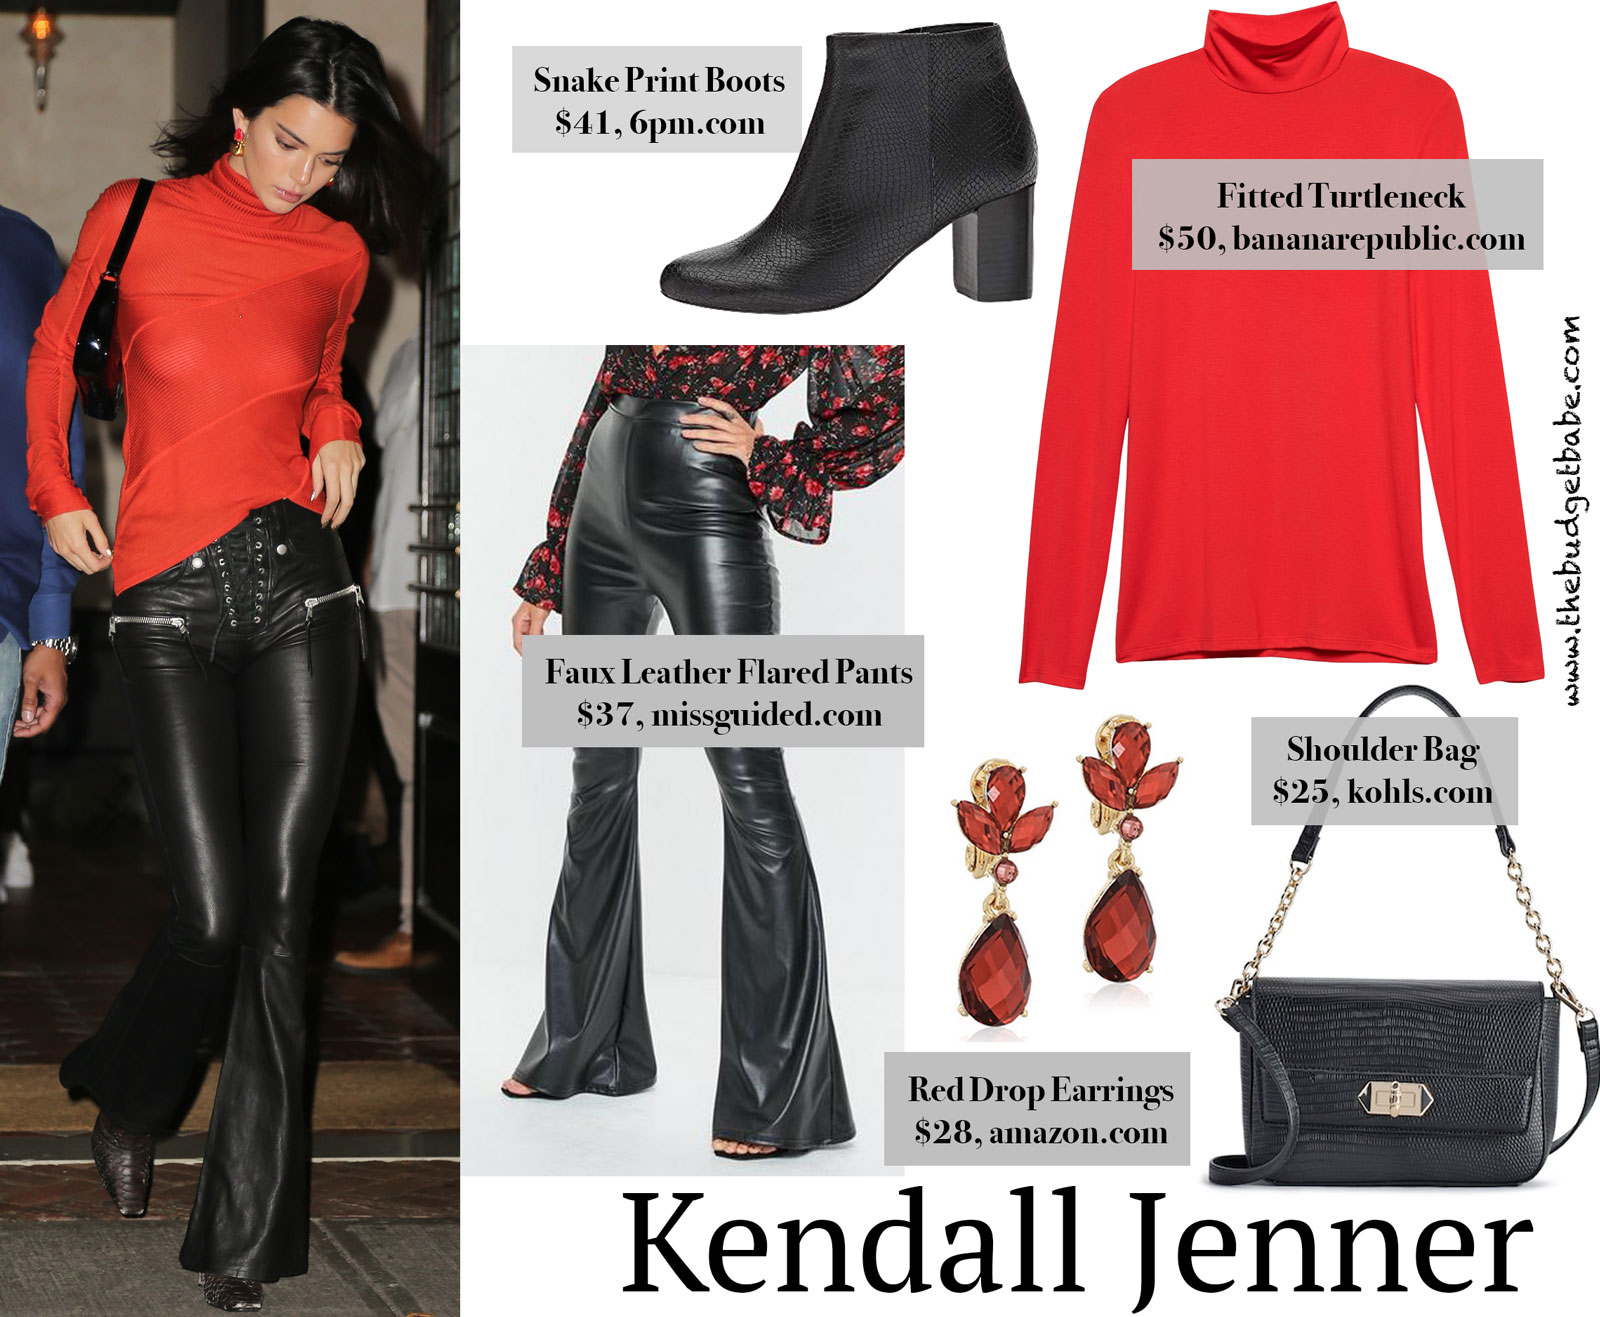 Kendall Jenner Red Turtleneck Look for Less